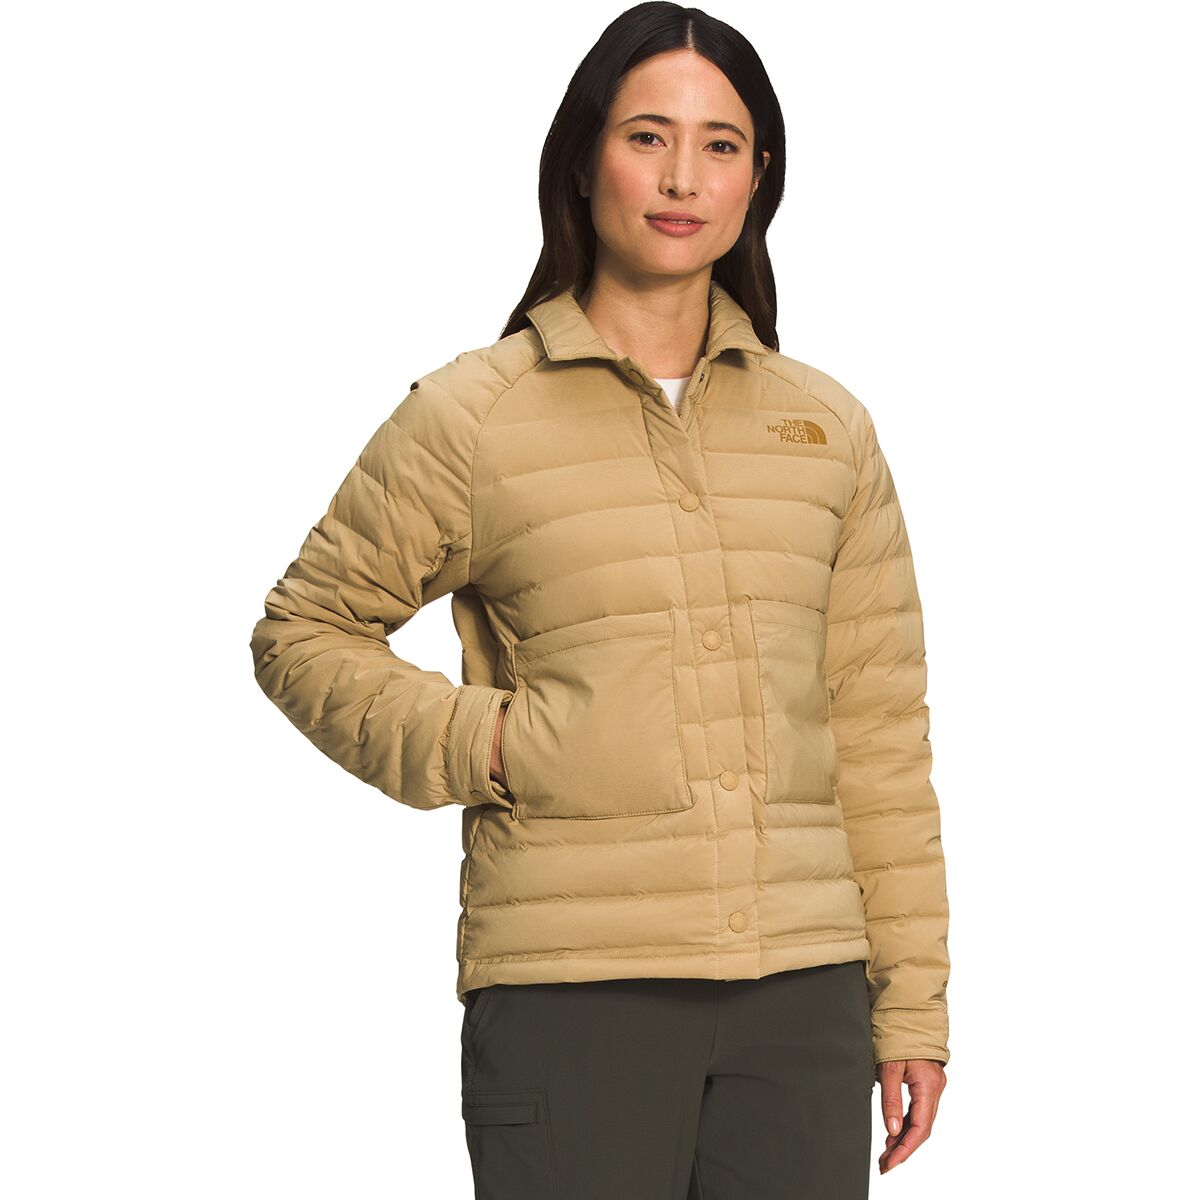 The North Face Belleview Stretch Down Shacket - Women's